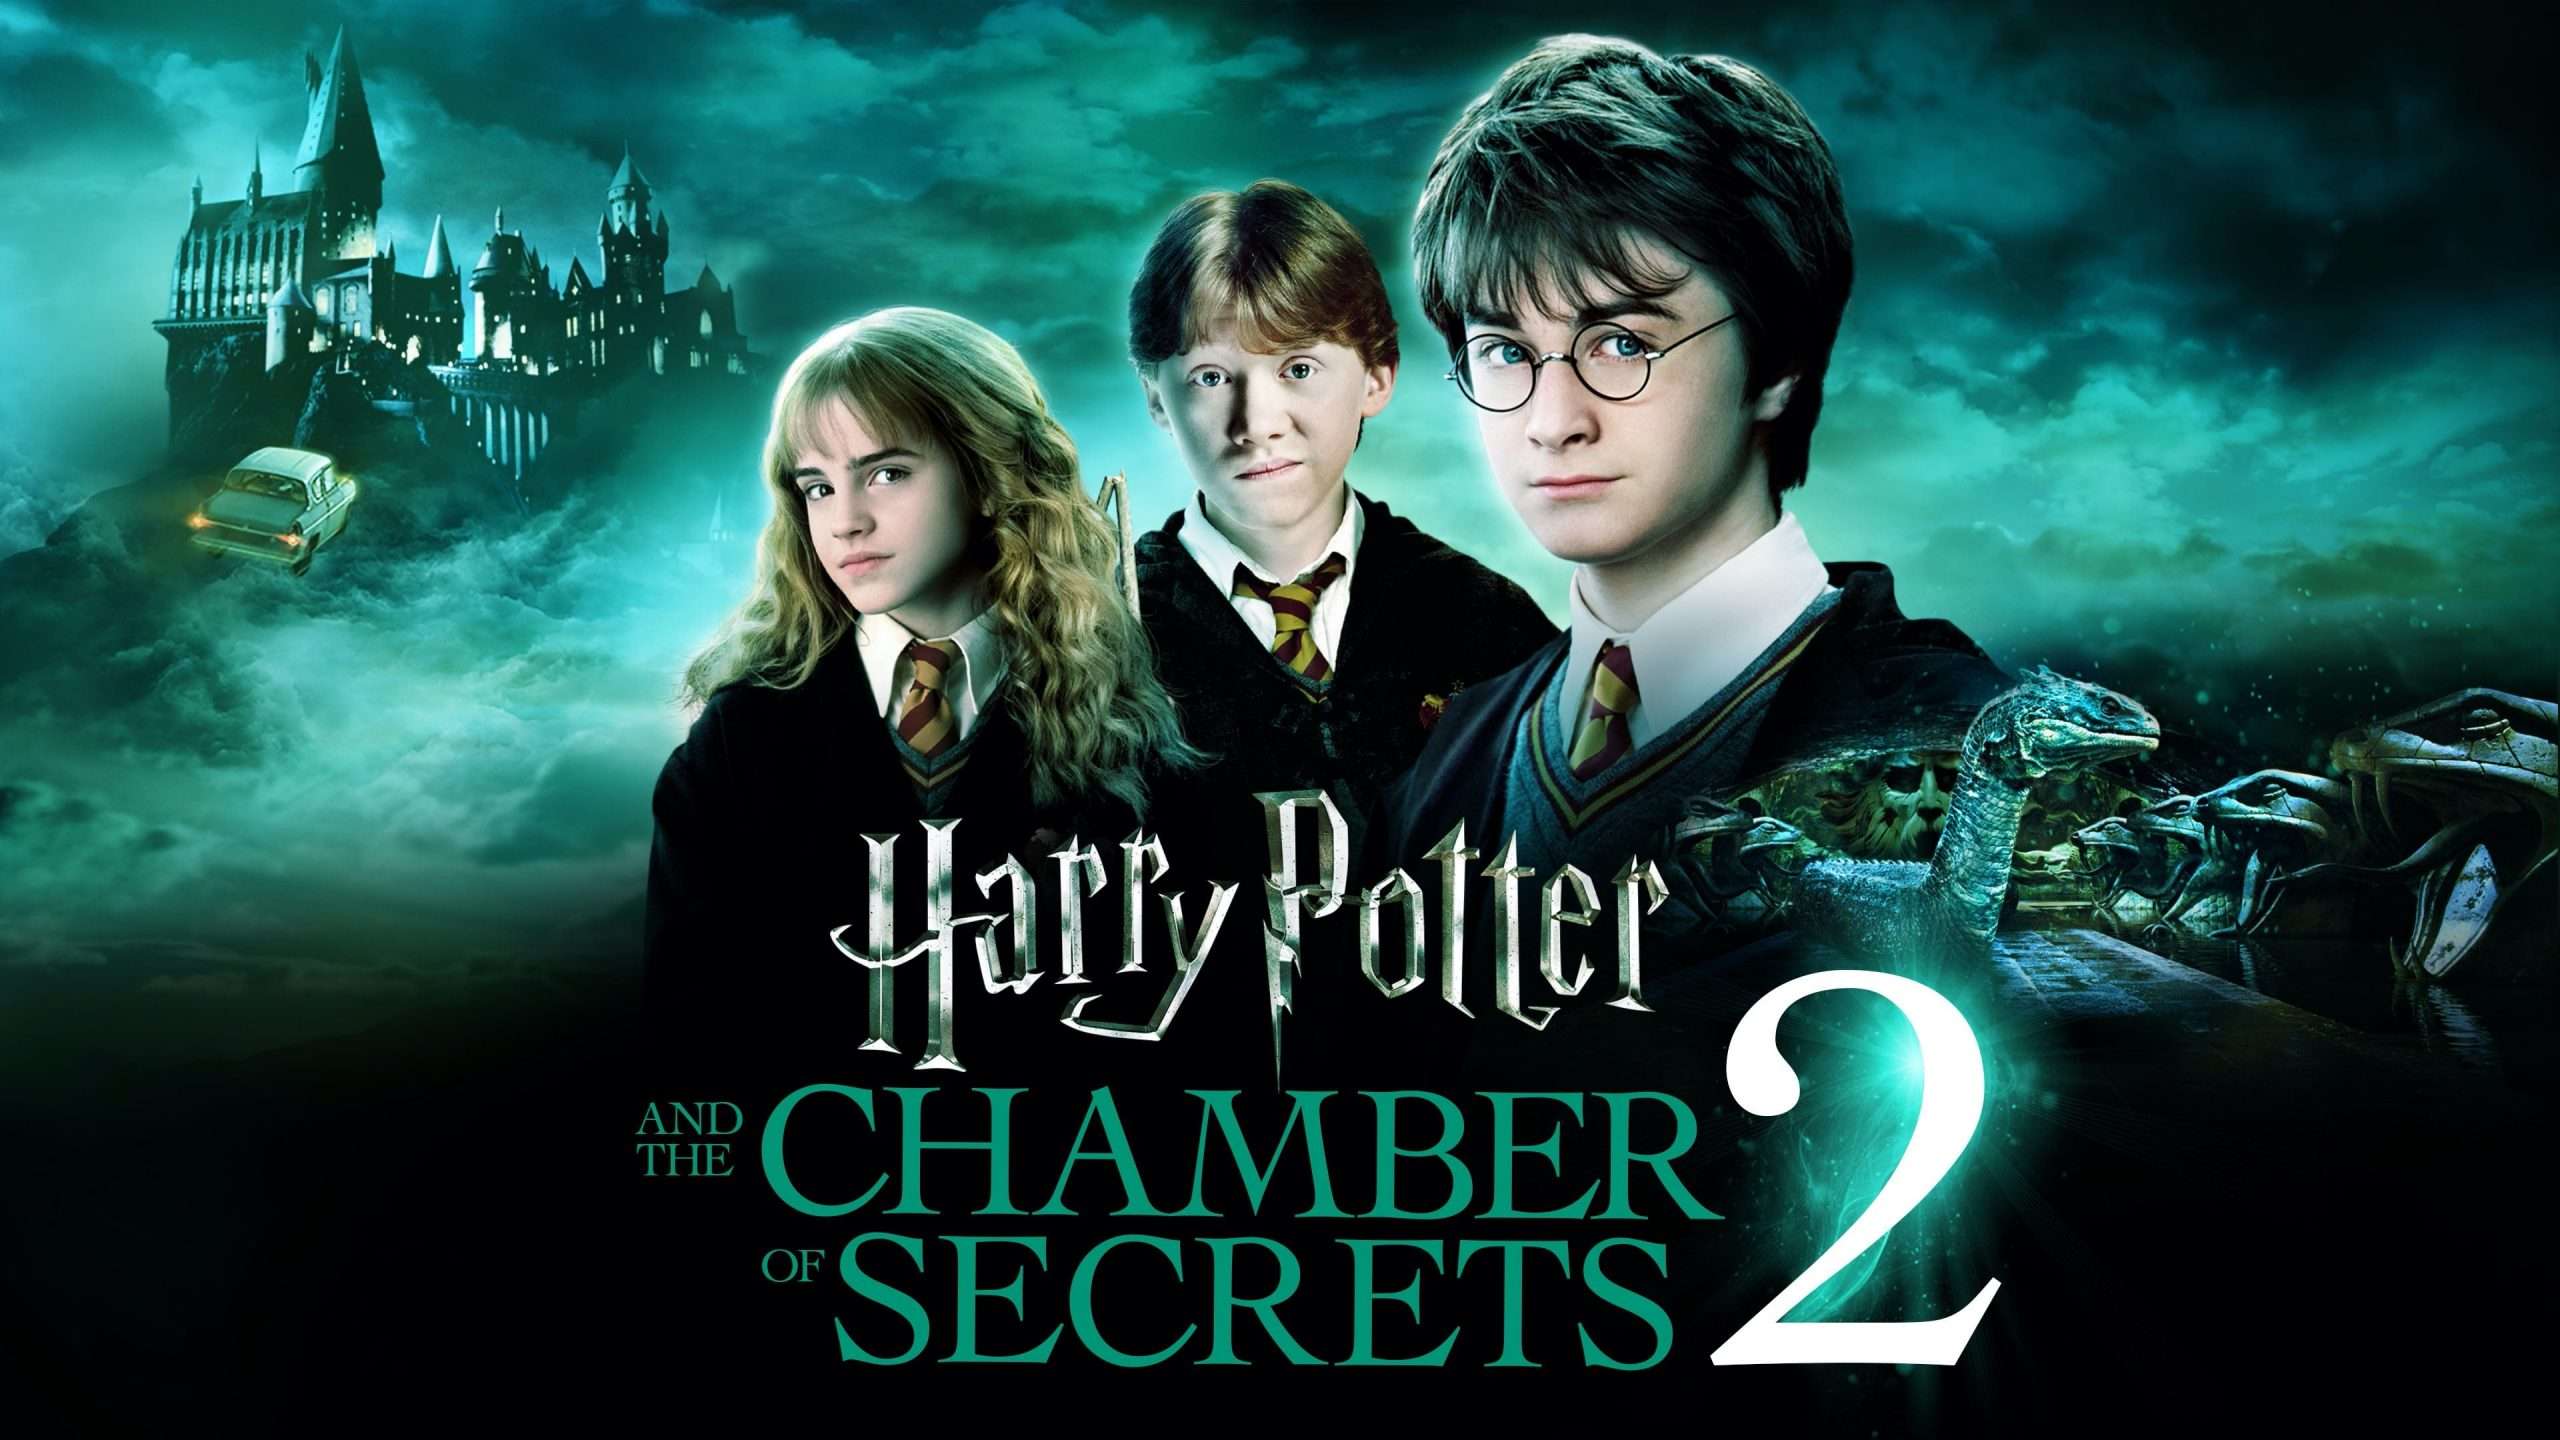 Watch Harry Potter and the Chamber of Secrets (2002) Full Movie Online ...